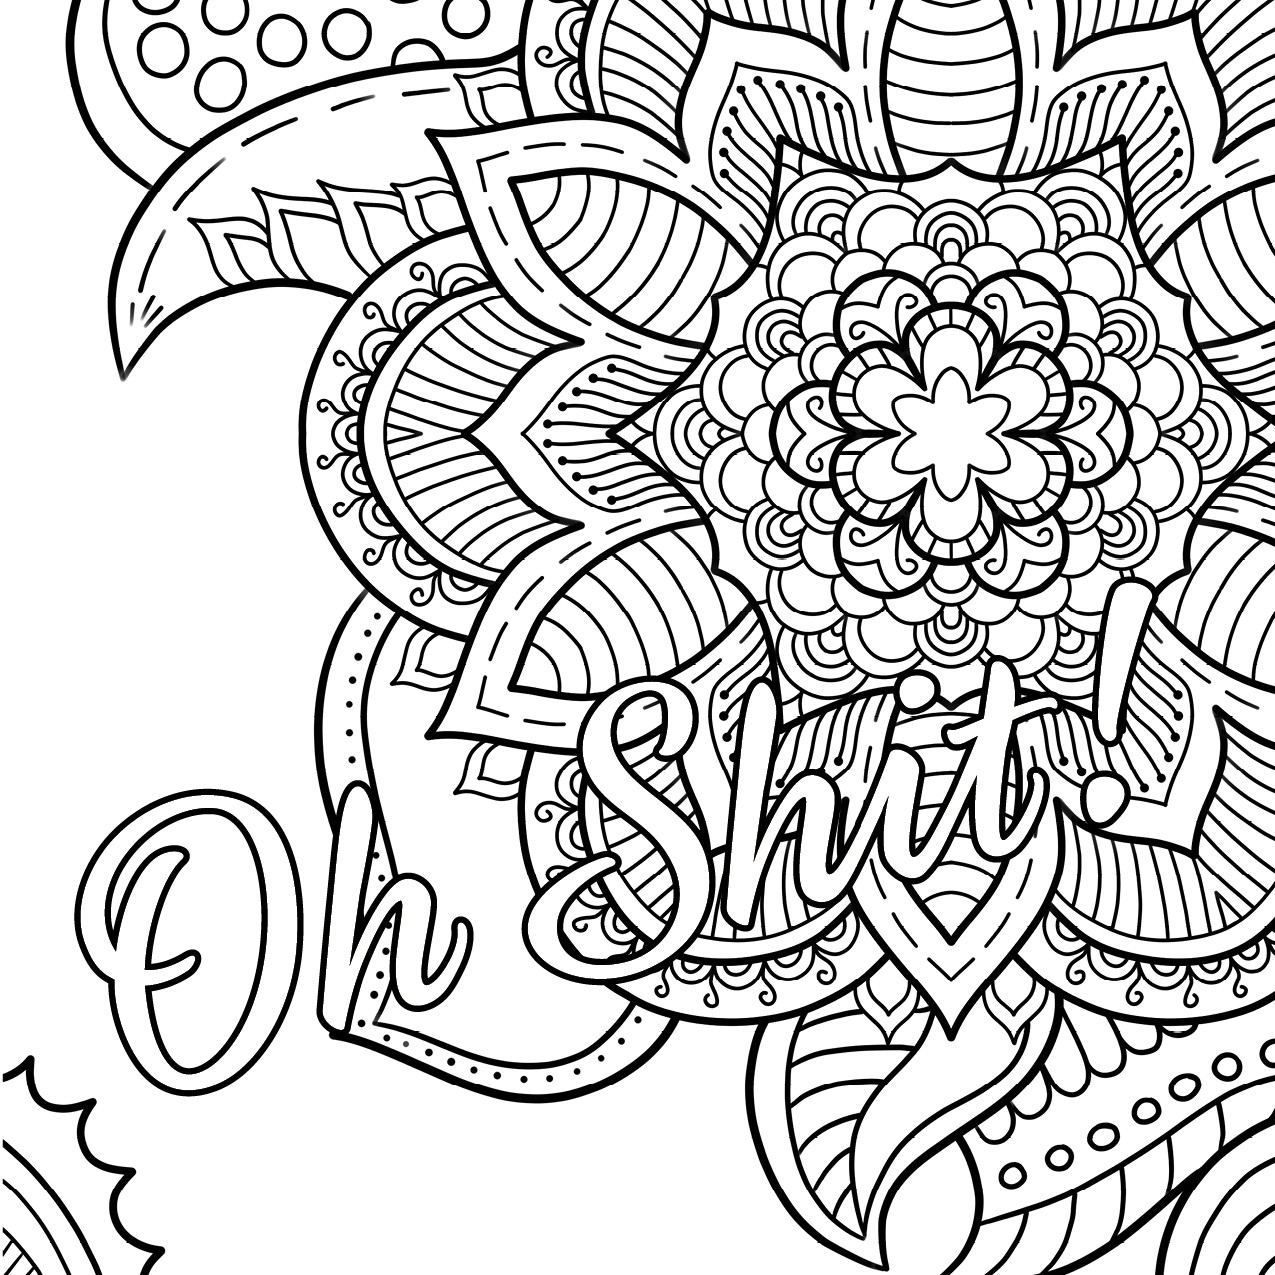 Adult Cursing Coloring Book
 Oh Shit Free Coloring Page Swear Word Coloring Book